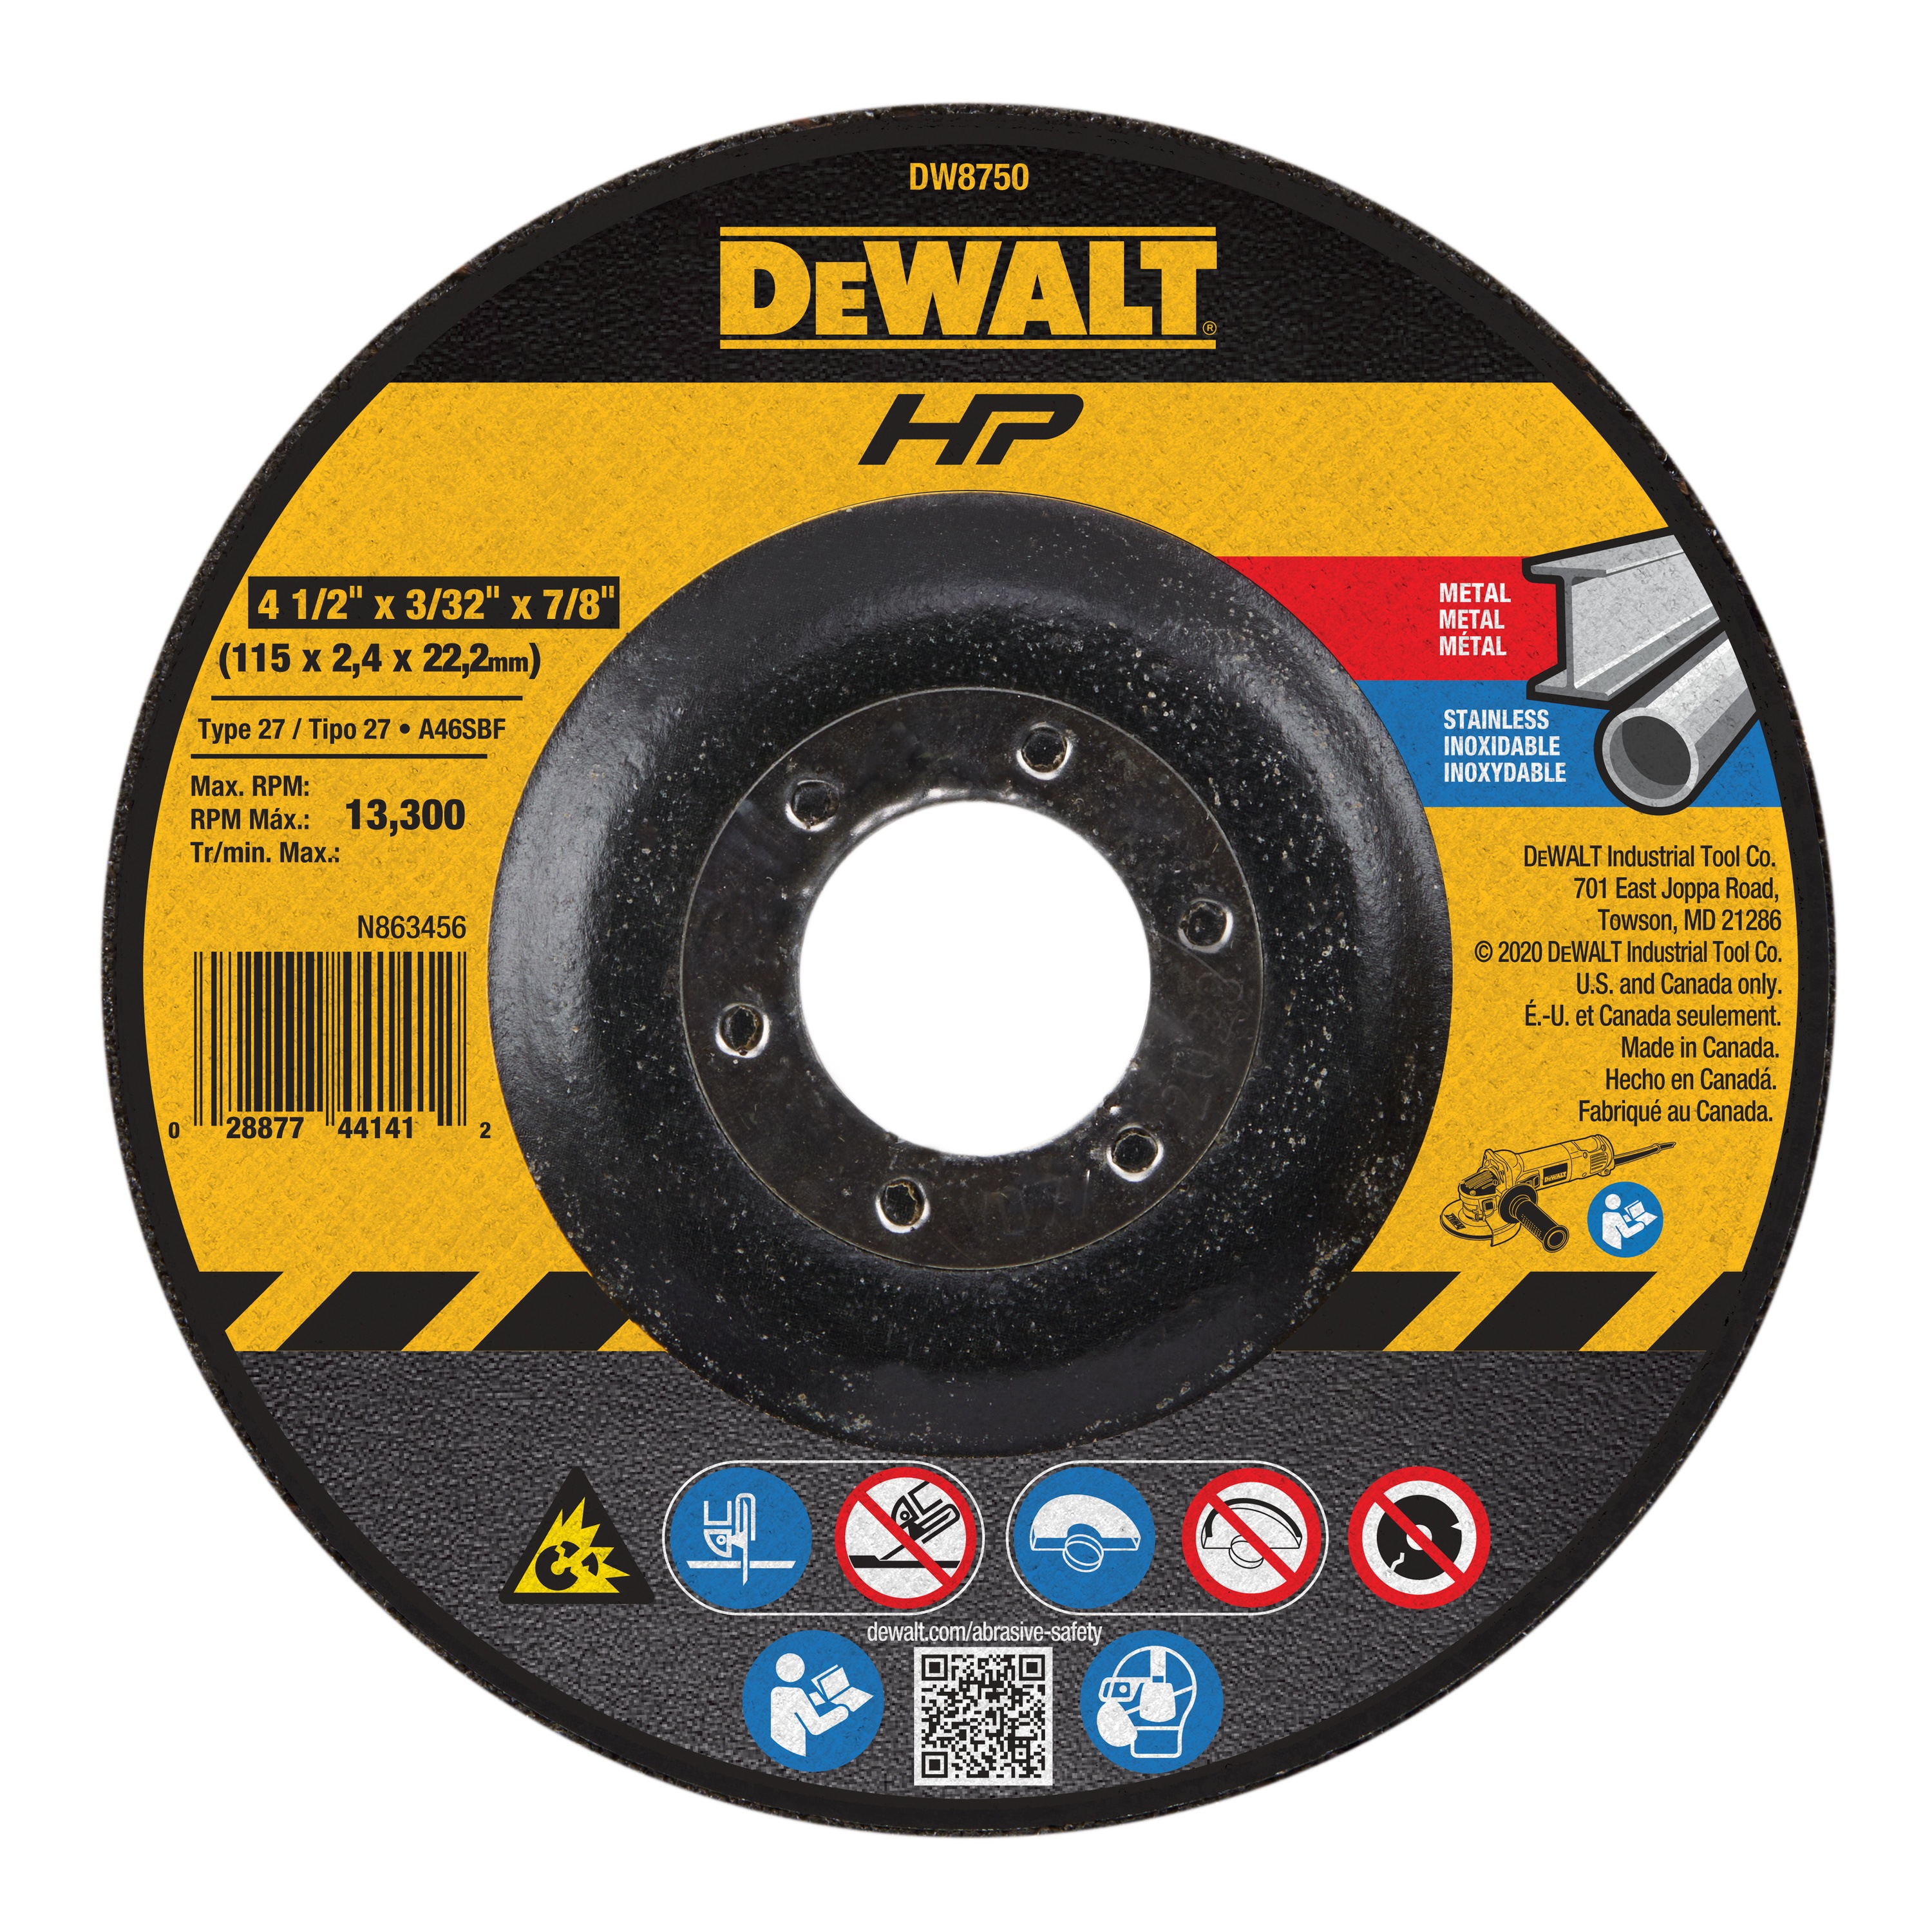 High performance cutting and notching wheels.